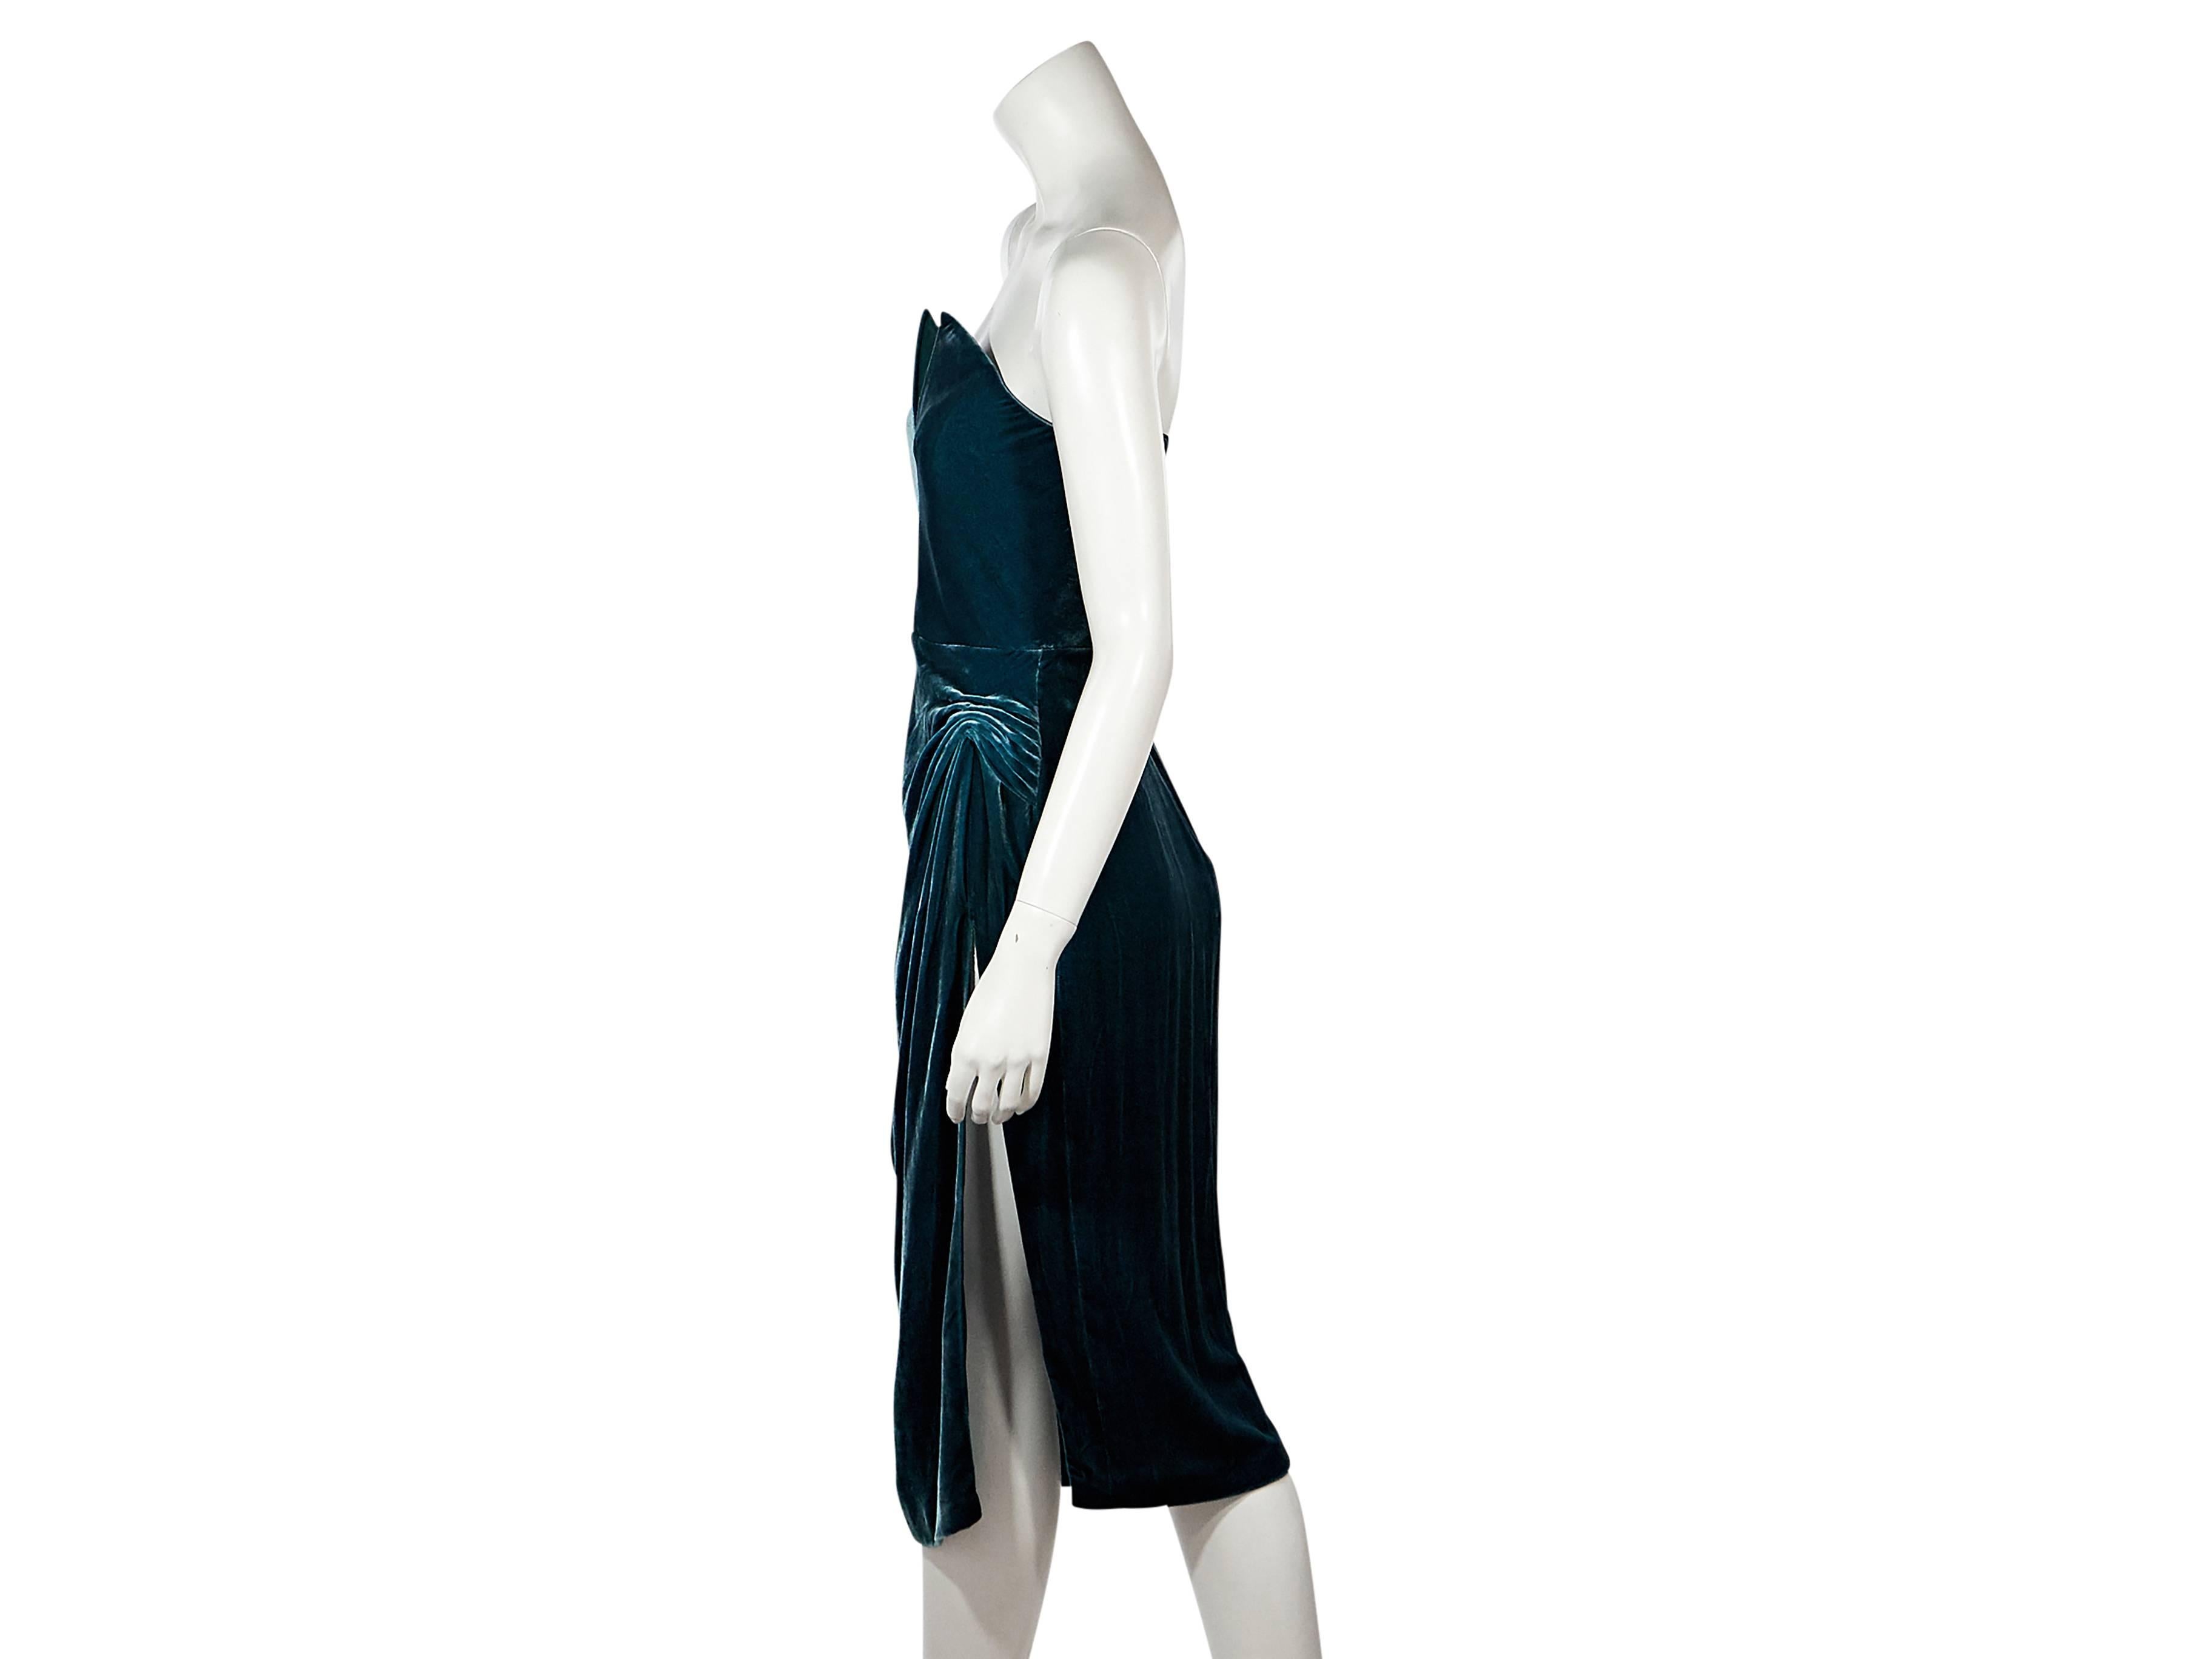 Product details: Emerald velvet cocktail dress by Cushnie et Ochs. Strapless. V-notch at bodice. Inner boning for structure. Side waist gathering. Concealed back zip closure. 
Condition: New with tags. 
Est. Retail $ 1,595.00